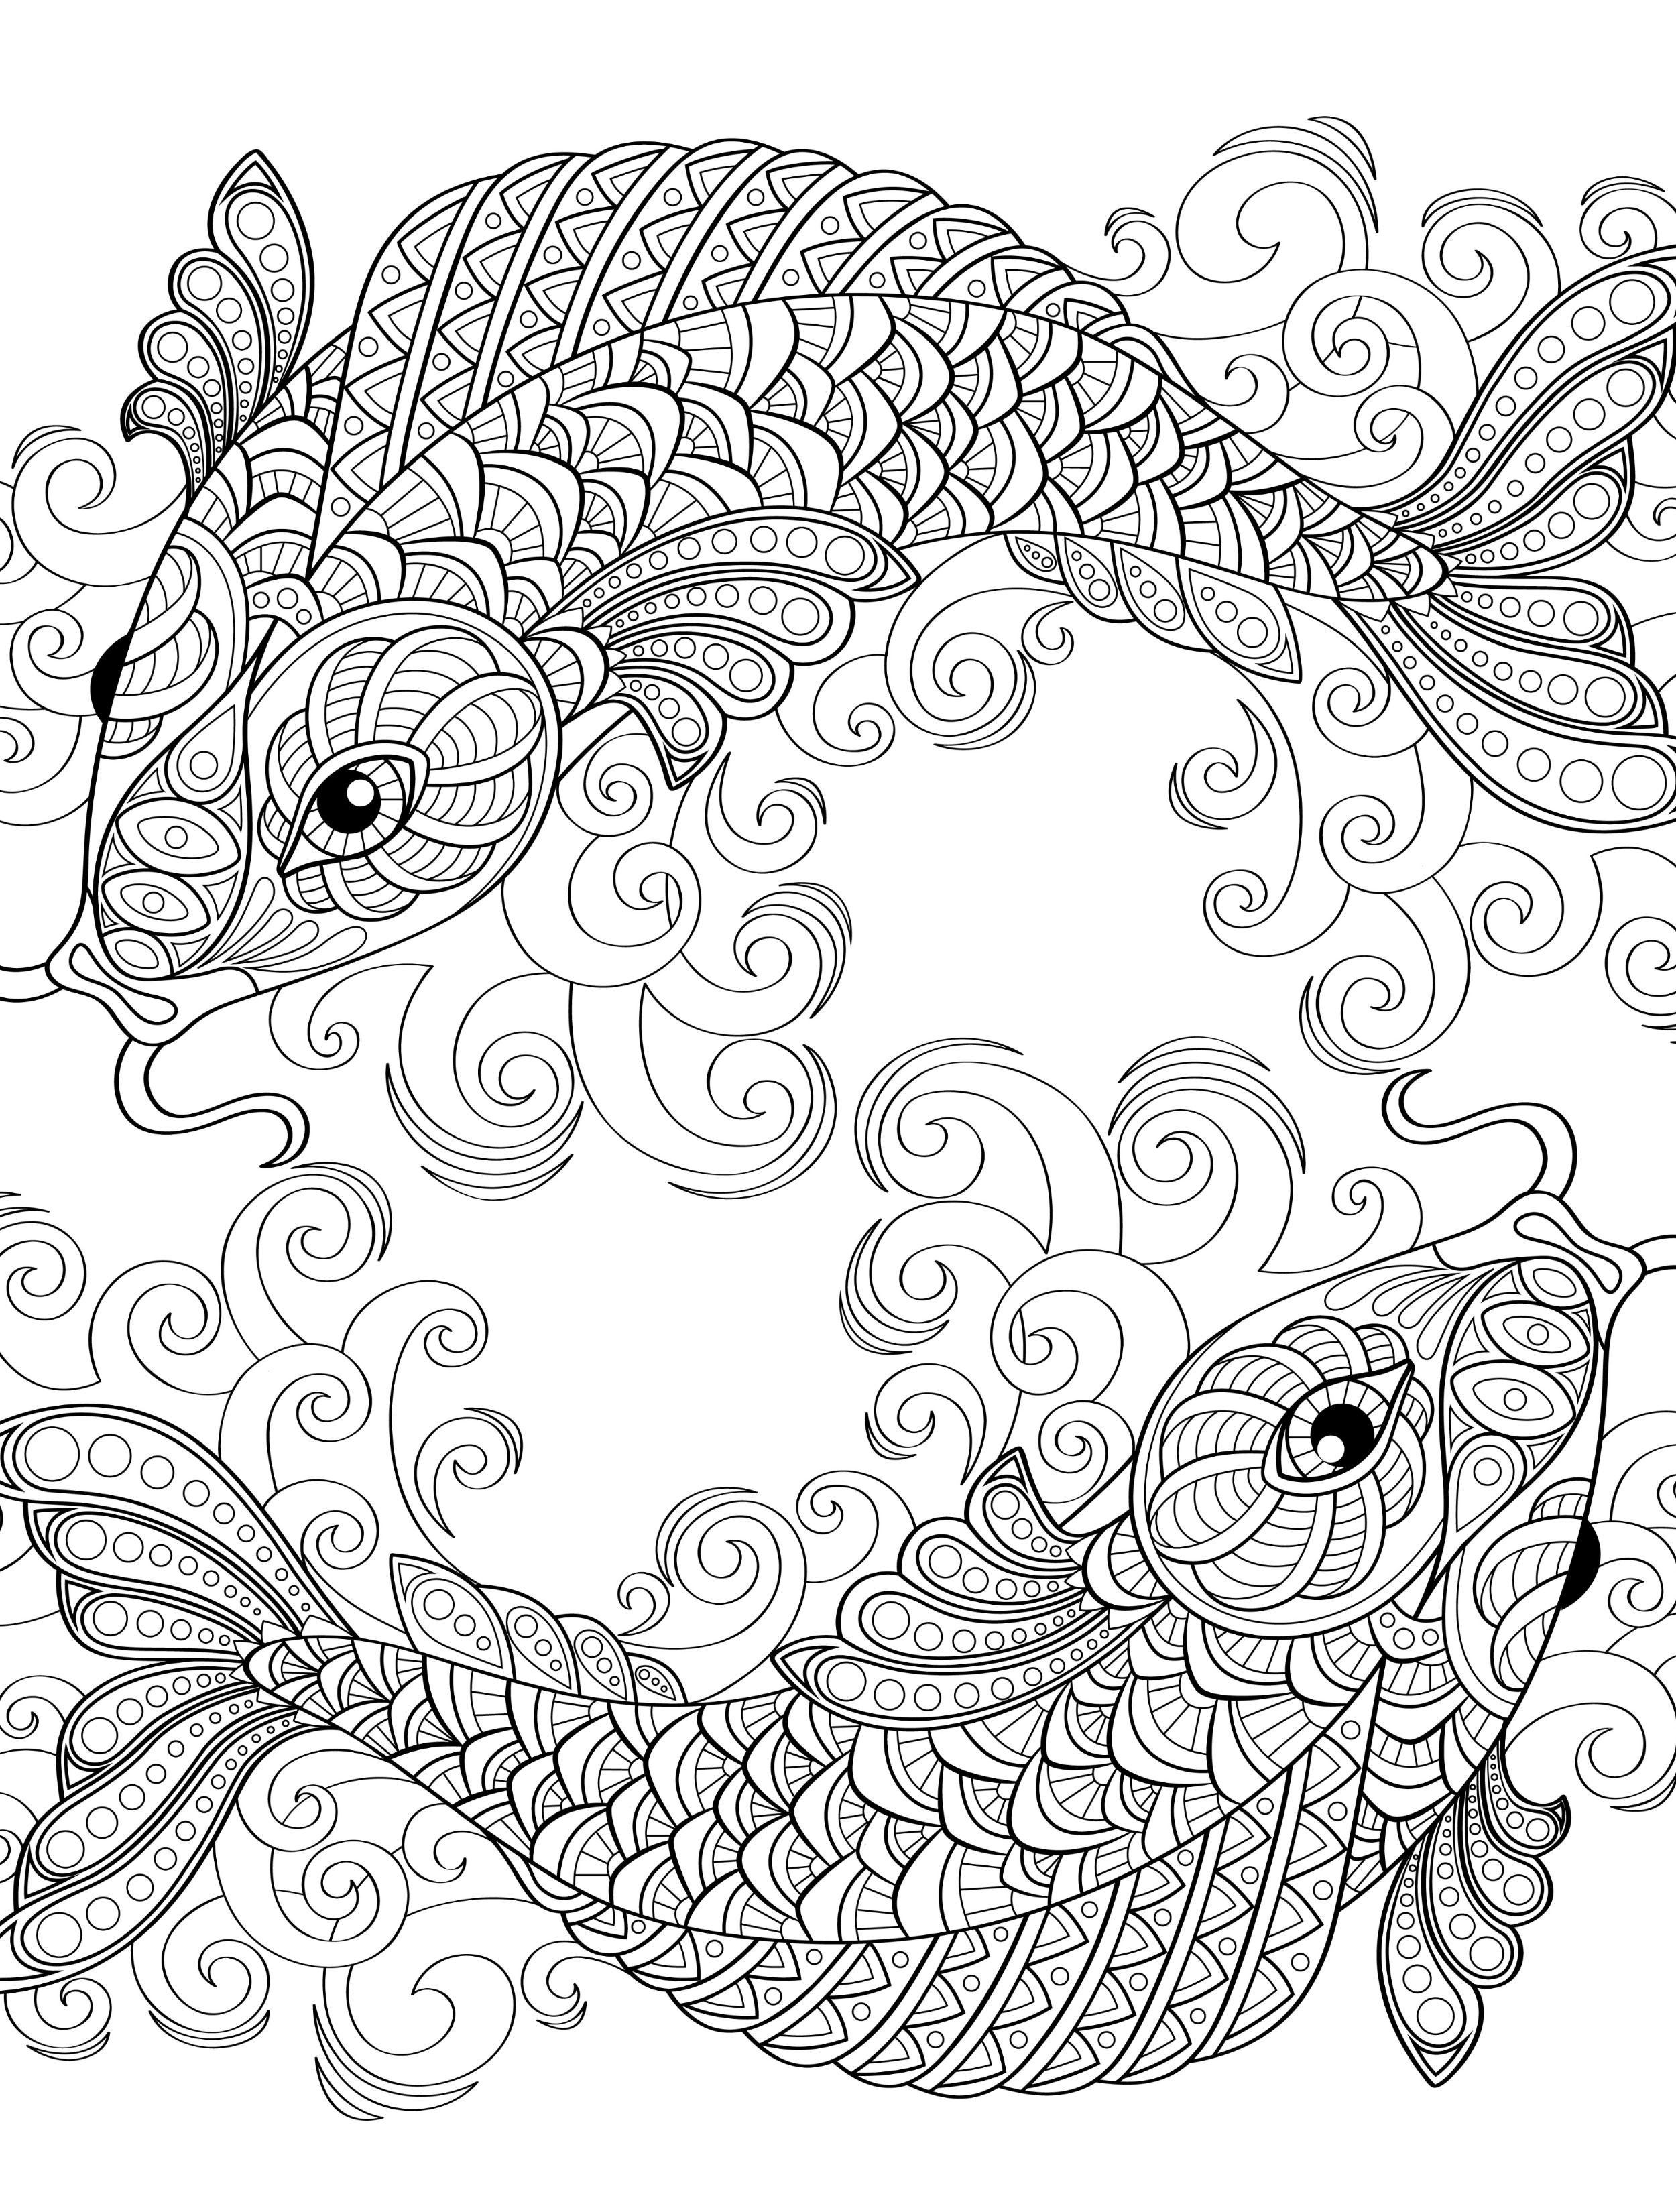 18 Absurdly Whimsical Adult Coloring Pages